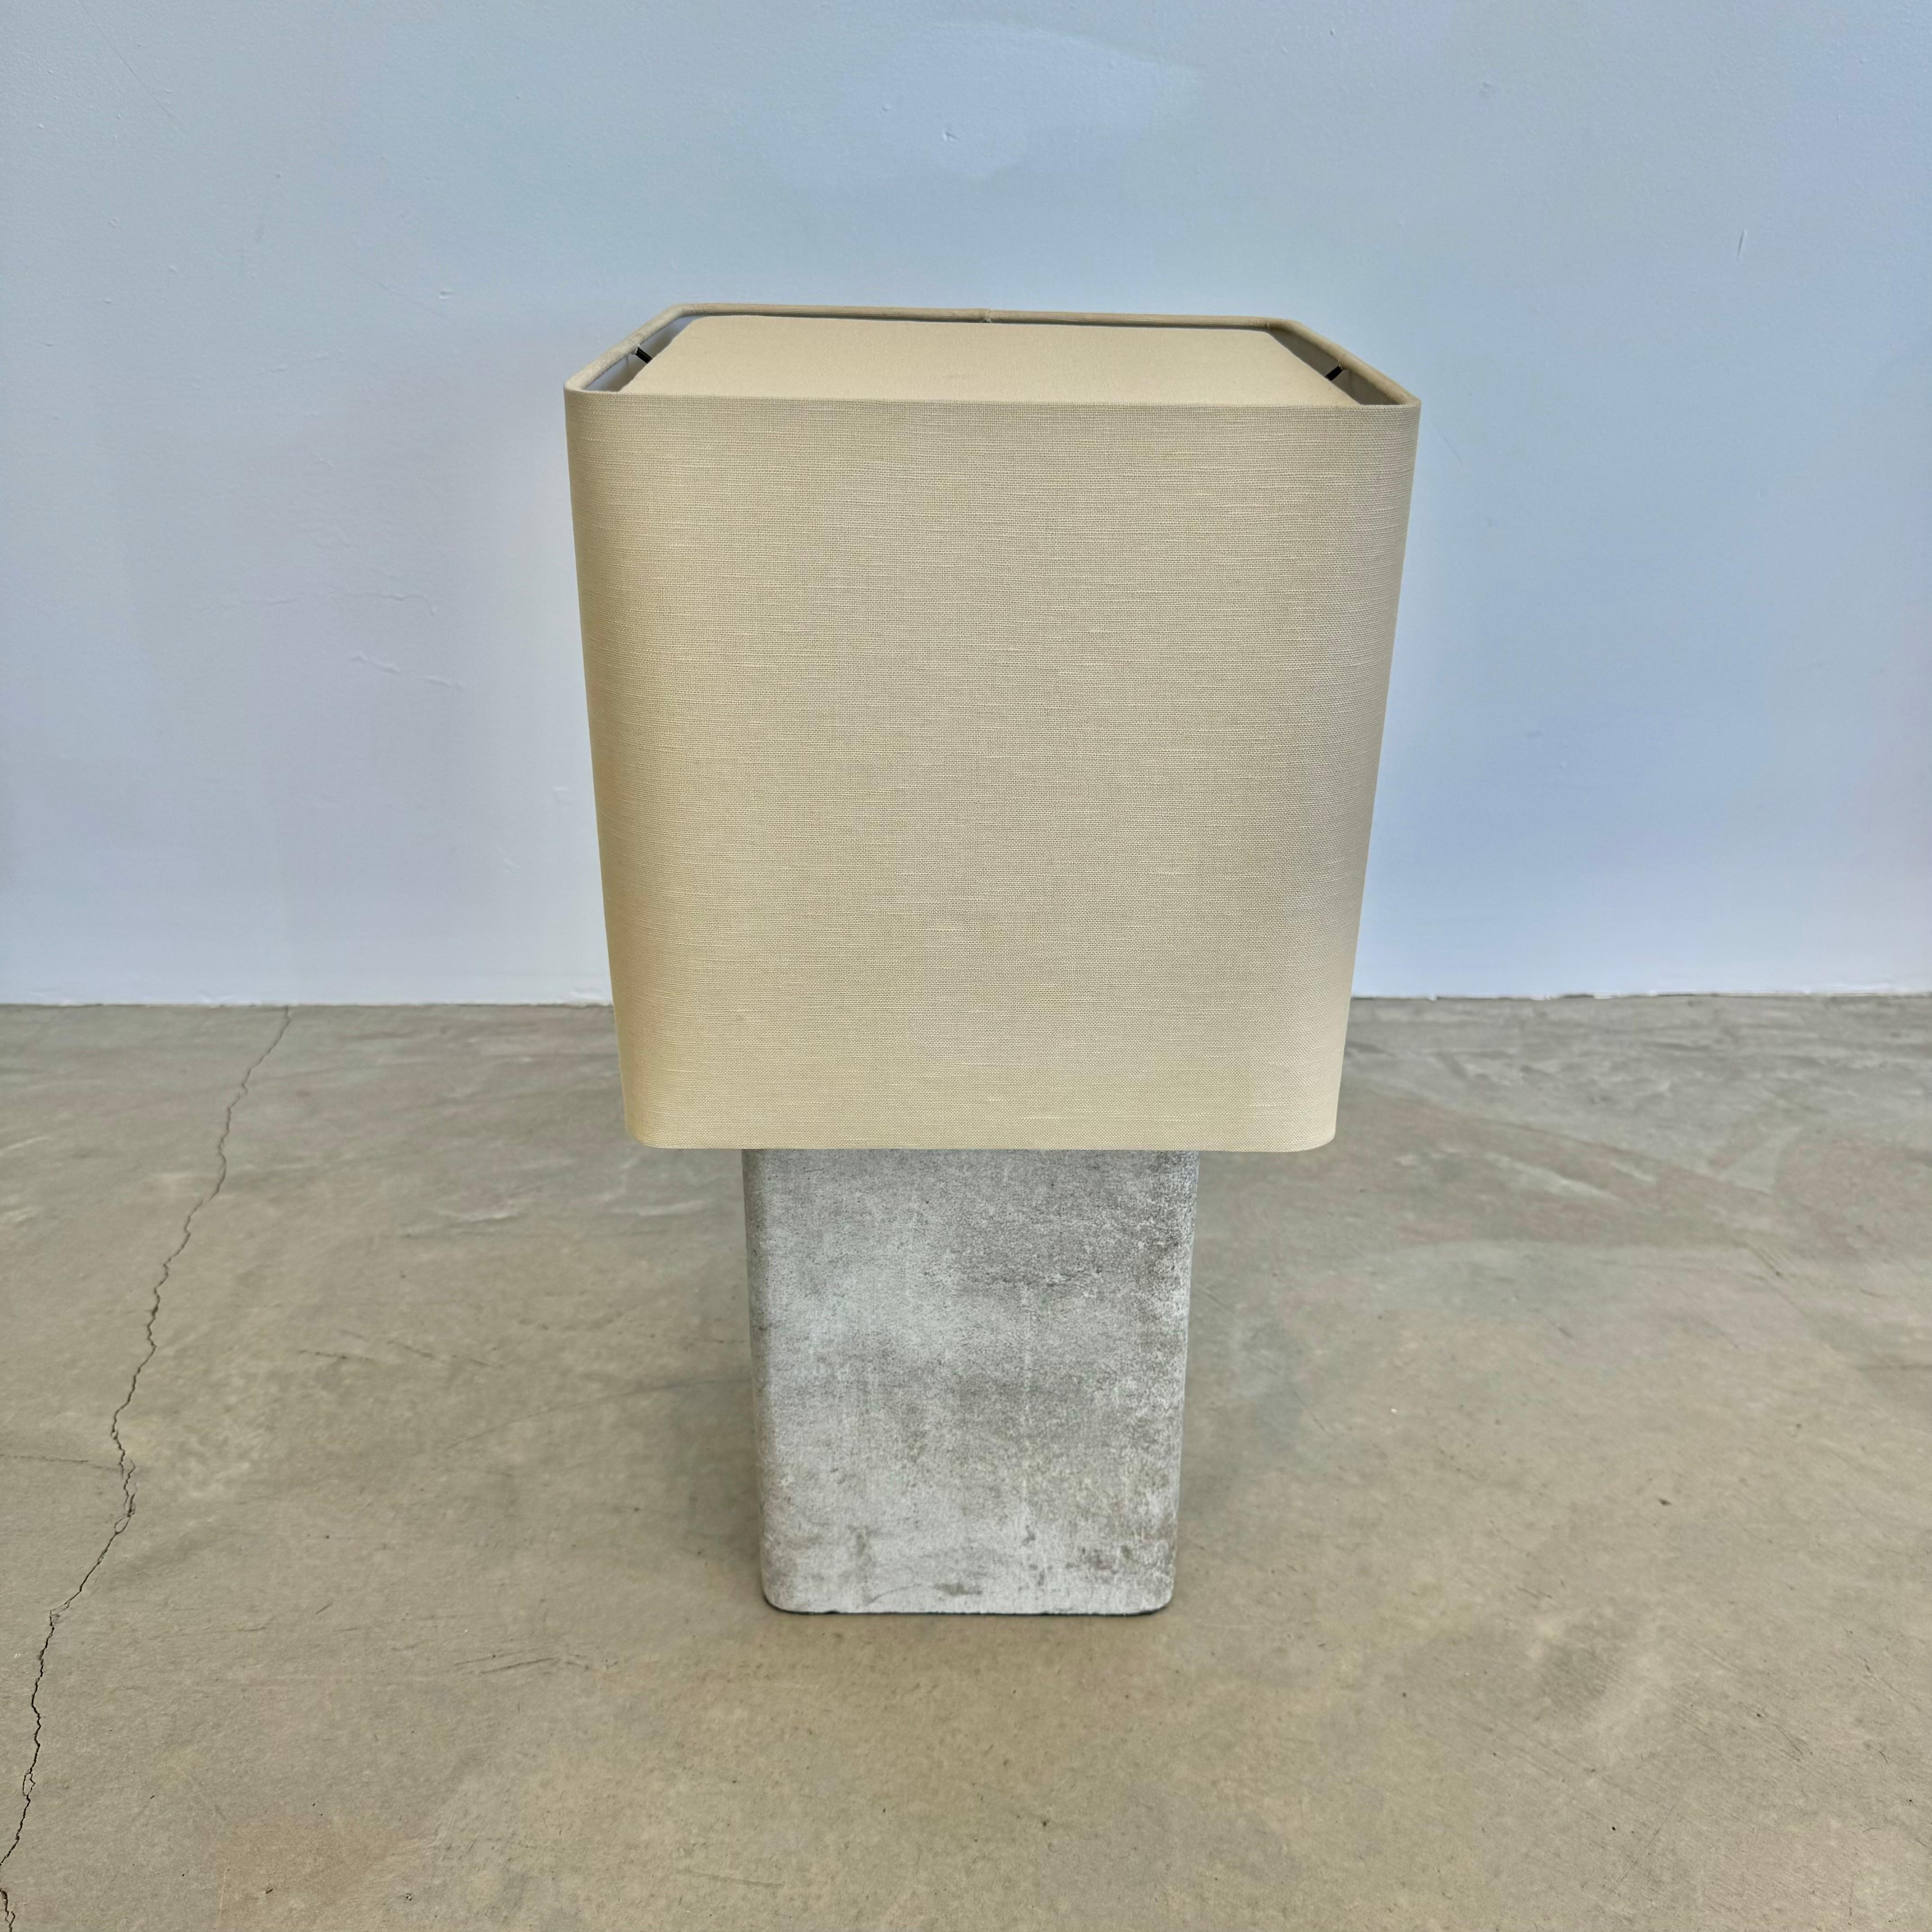 Linen Willy Guhl Large Concrete Table Lamp, 1960s Switzerland For Sale